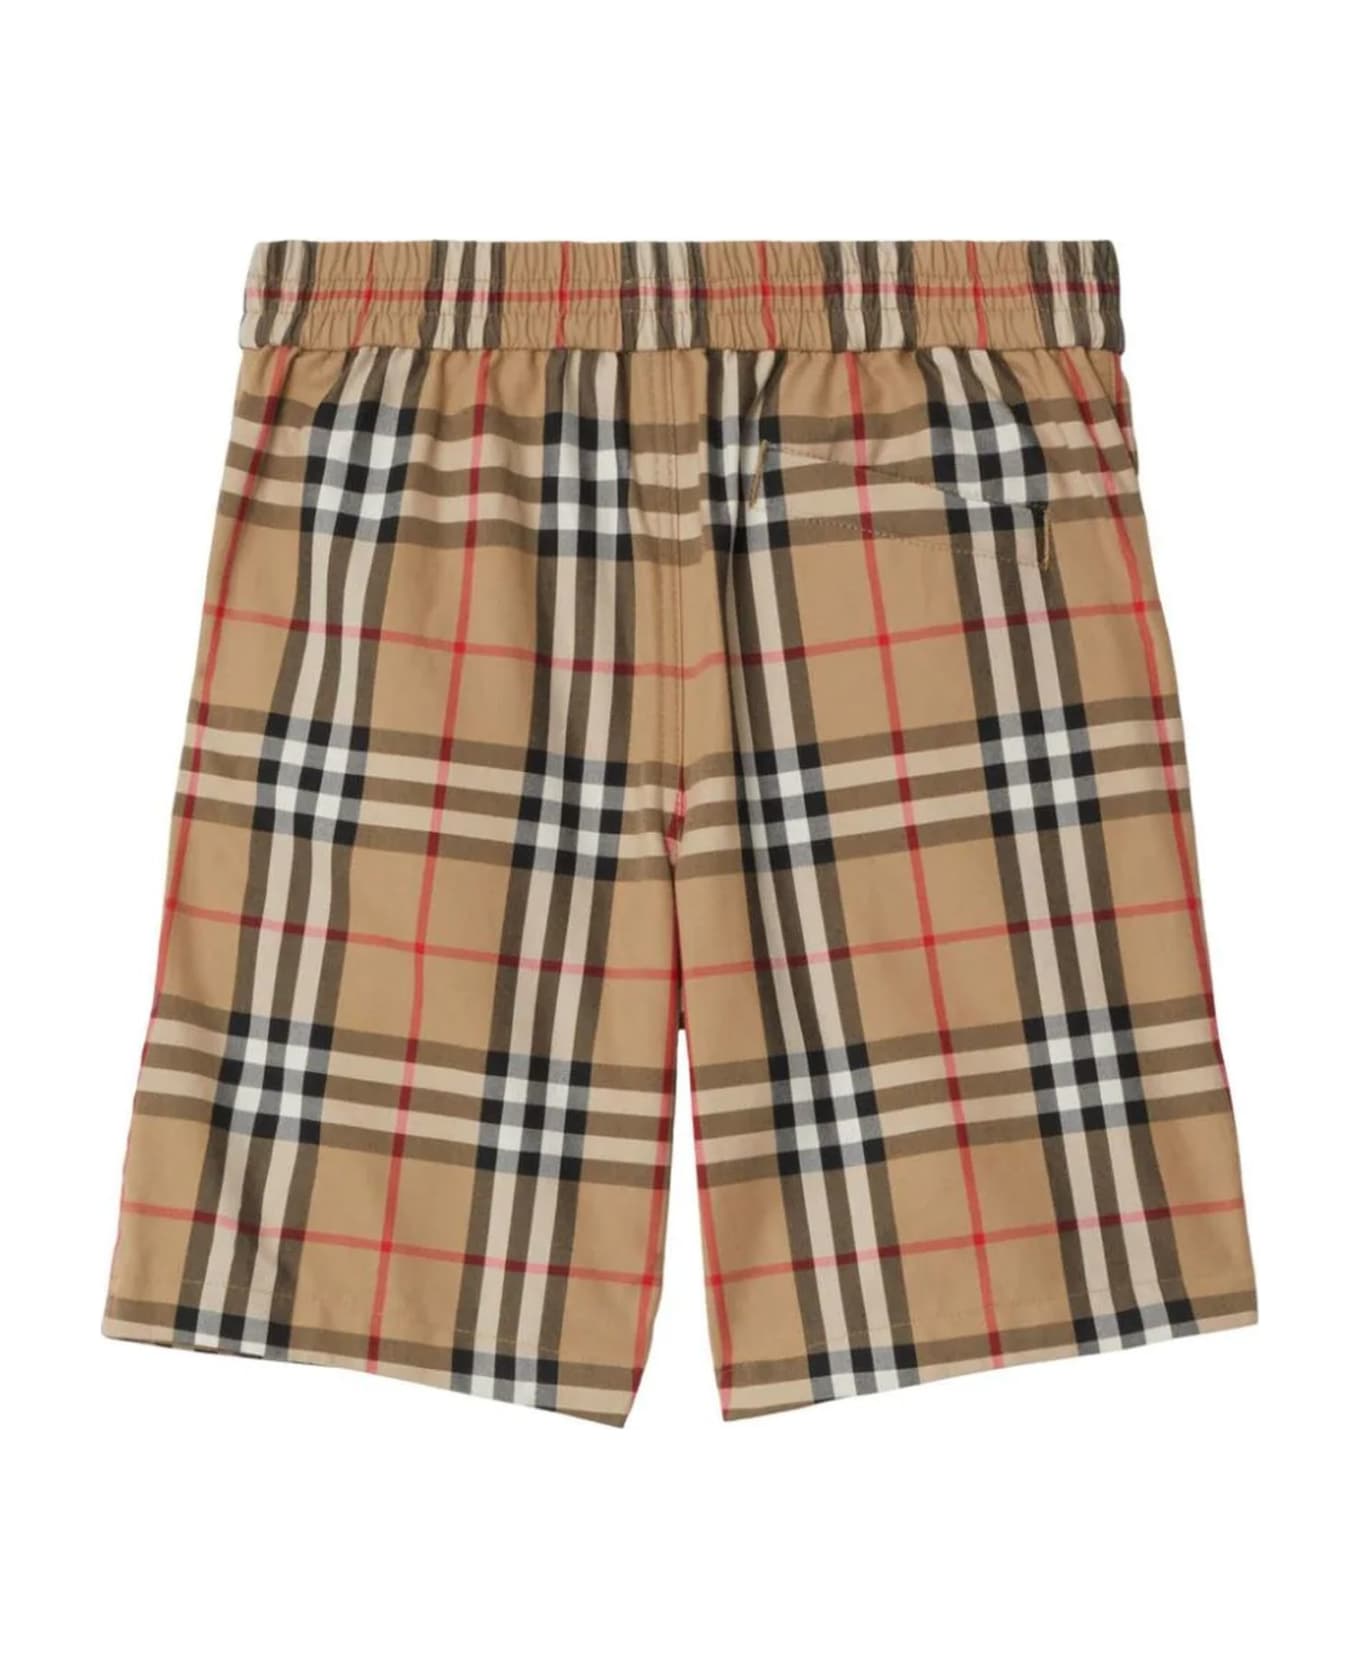 Burberry Beige Cotton Shorts - Archive Beige Ip Chk ボトムス